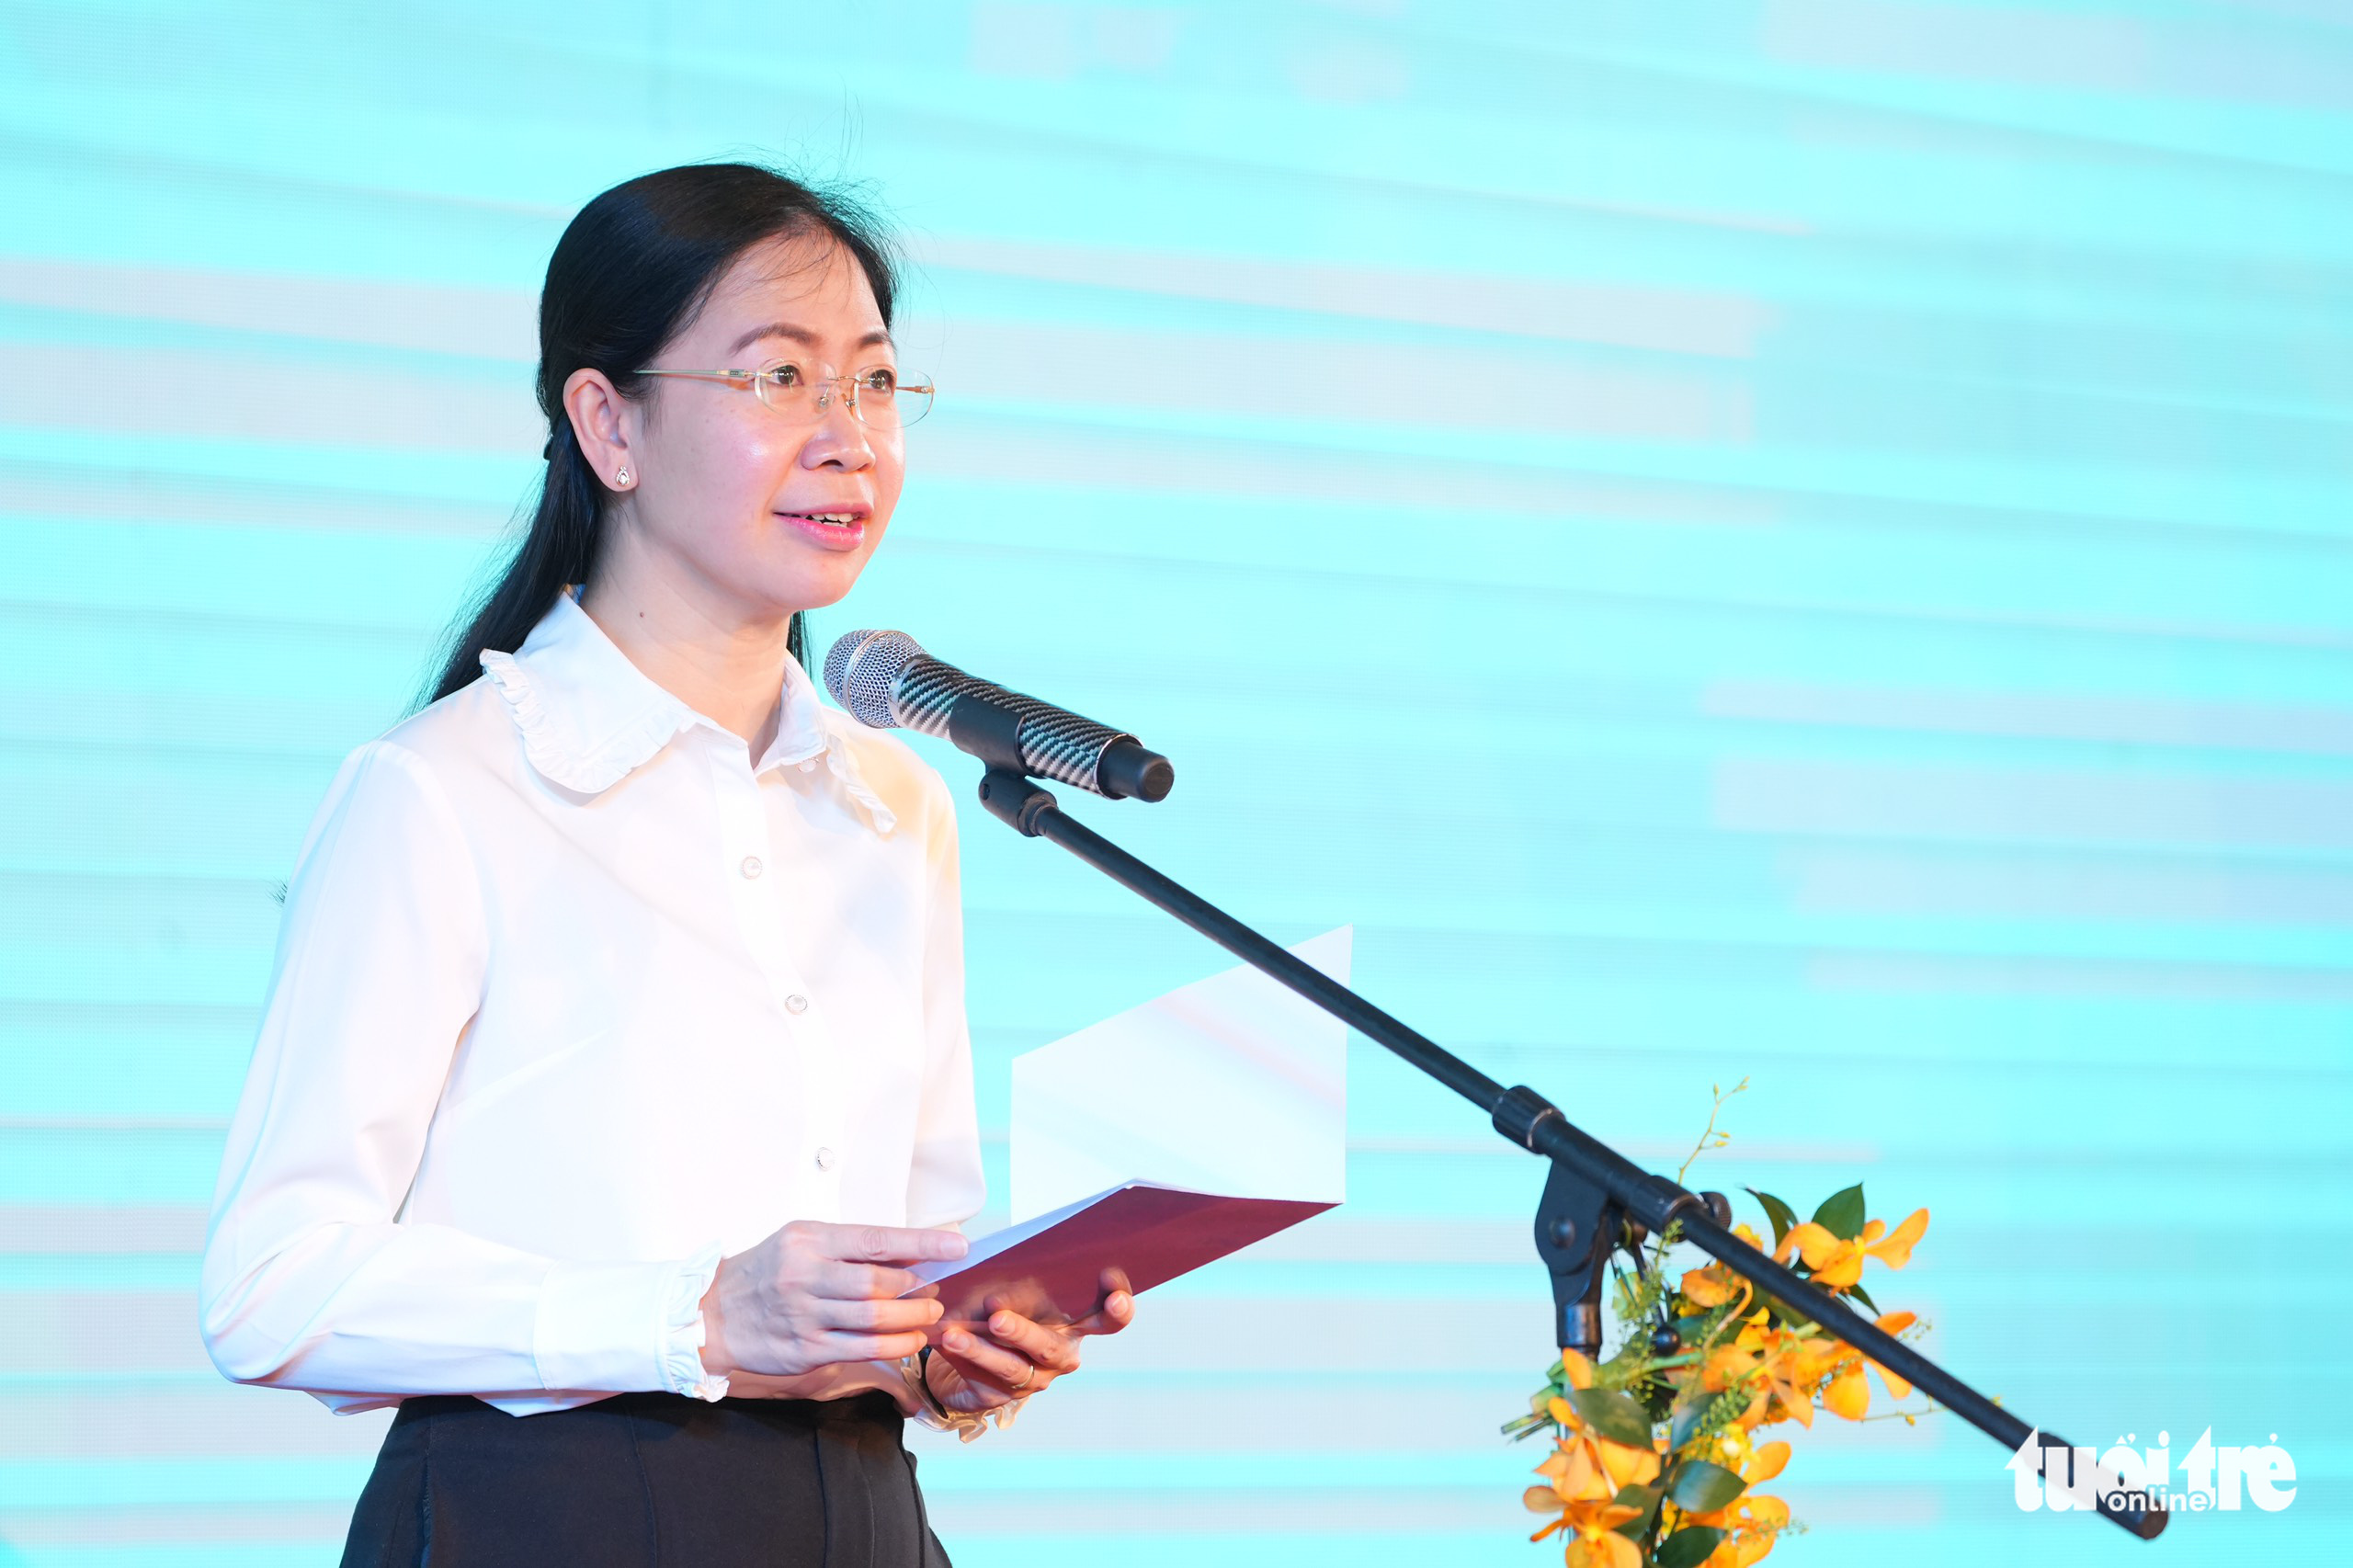 Secretary of Ho Chi Minh City Youth Union Phan Thi Thanh Phuong speaks at the groundbreaking of the Tuoi Tre Complex in Go Vap District, Ho Chi Minh City, August 30, 2022. Photo: Huu Hanh / Tuoi Tre